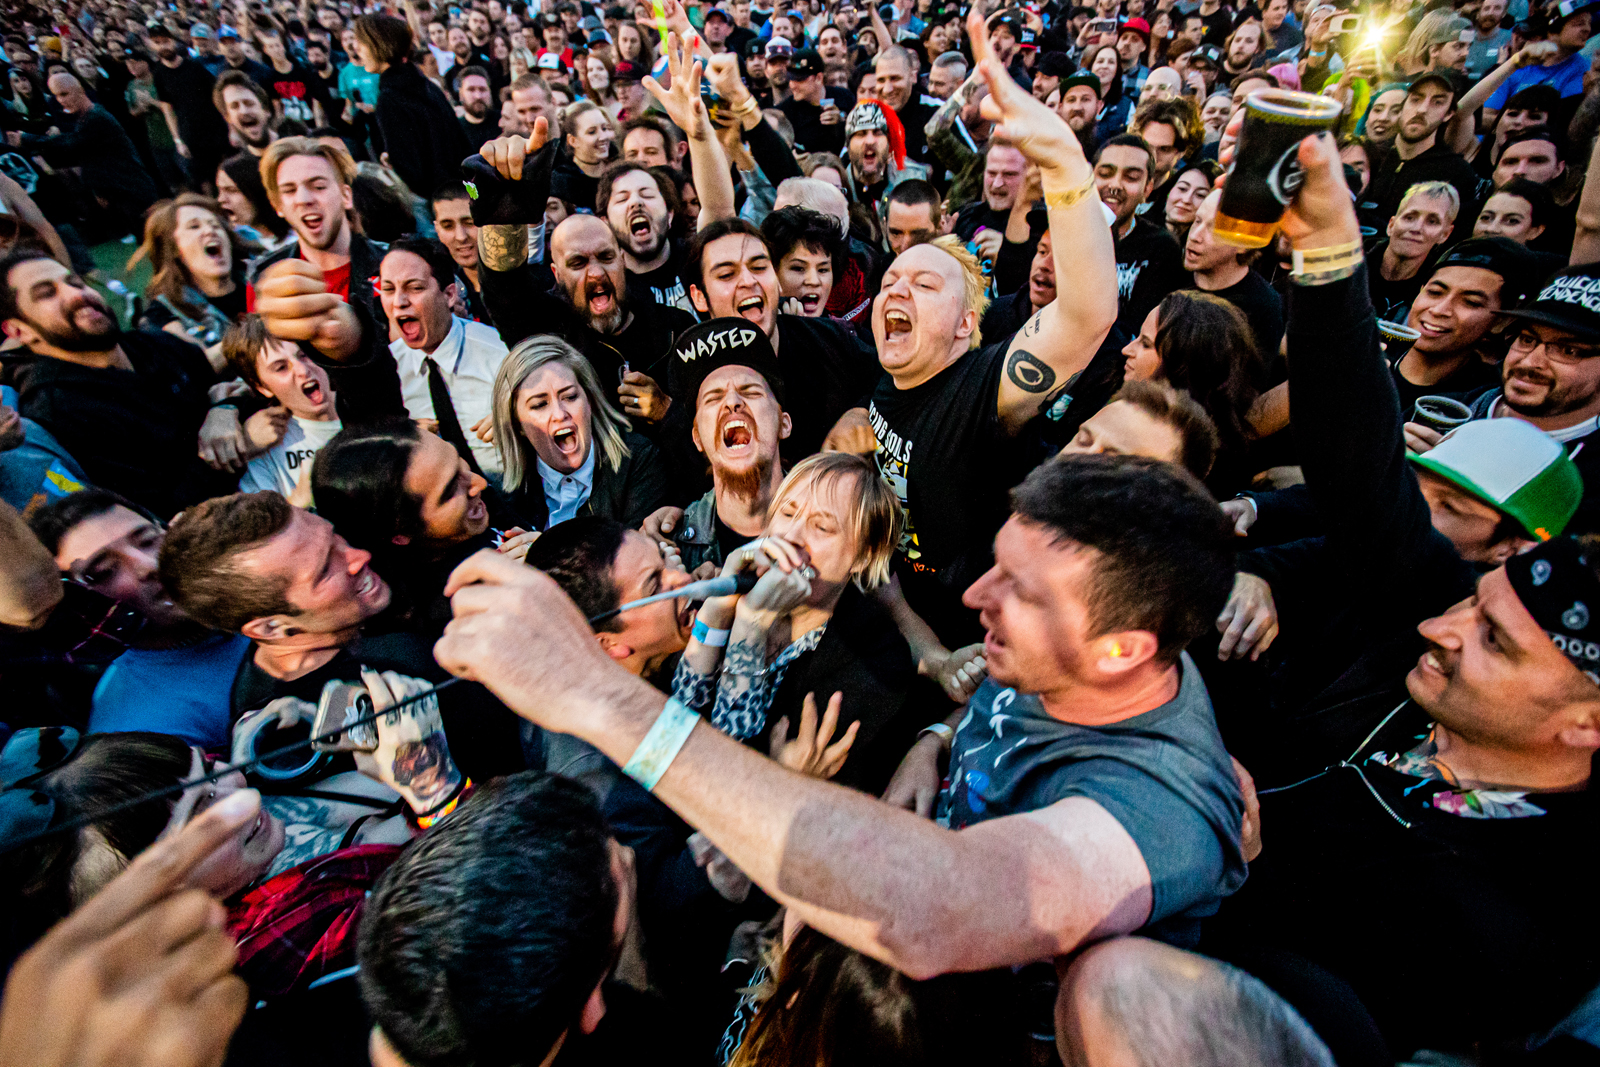 Punk Rock Bowling’s expanded edition upped the intensity in 2019 Las